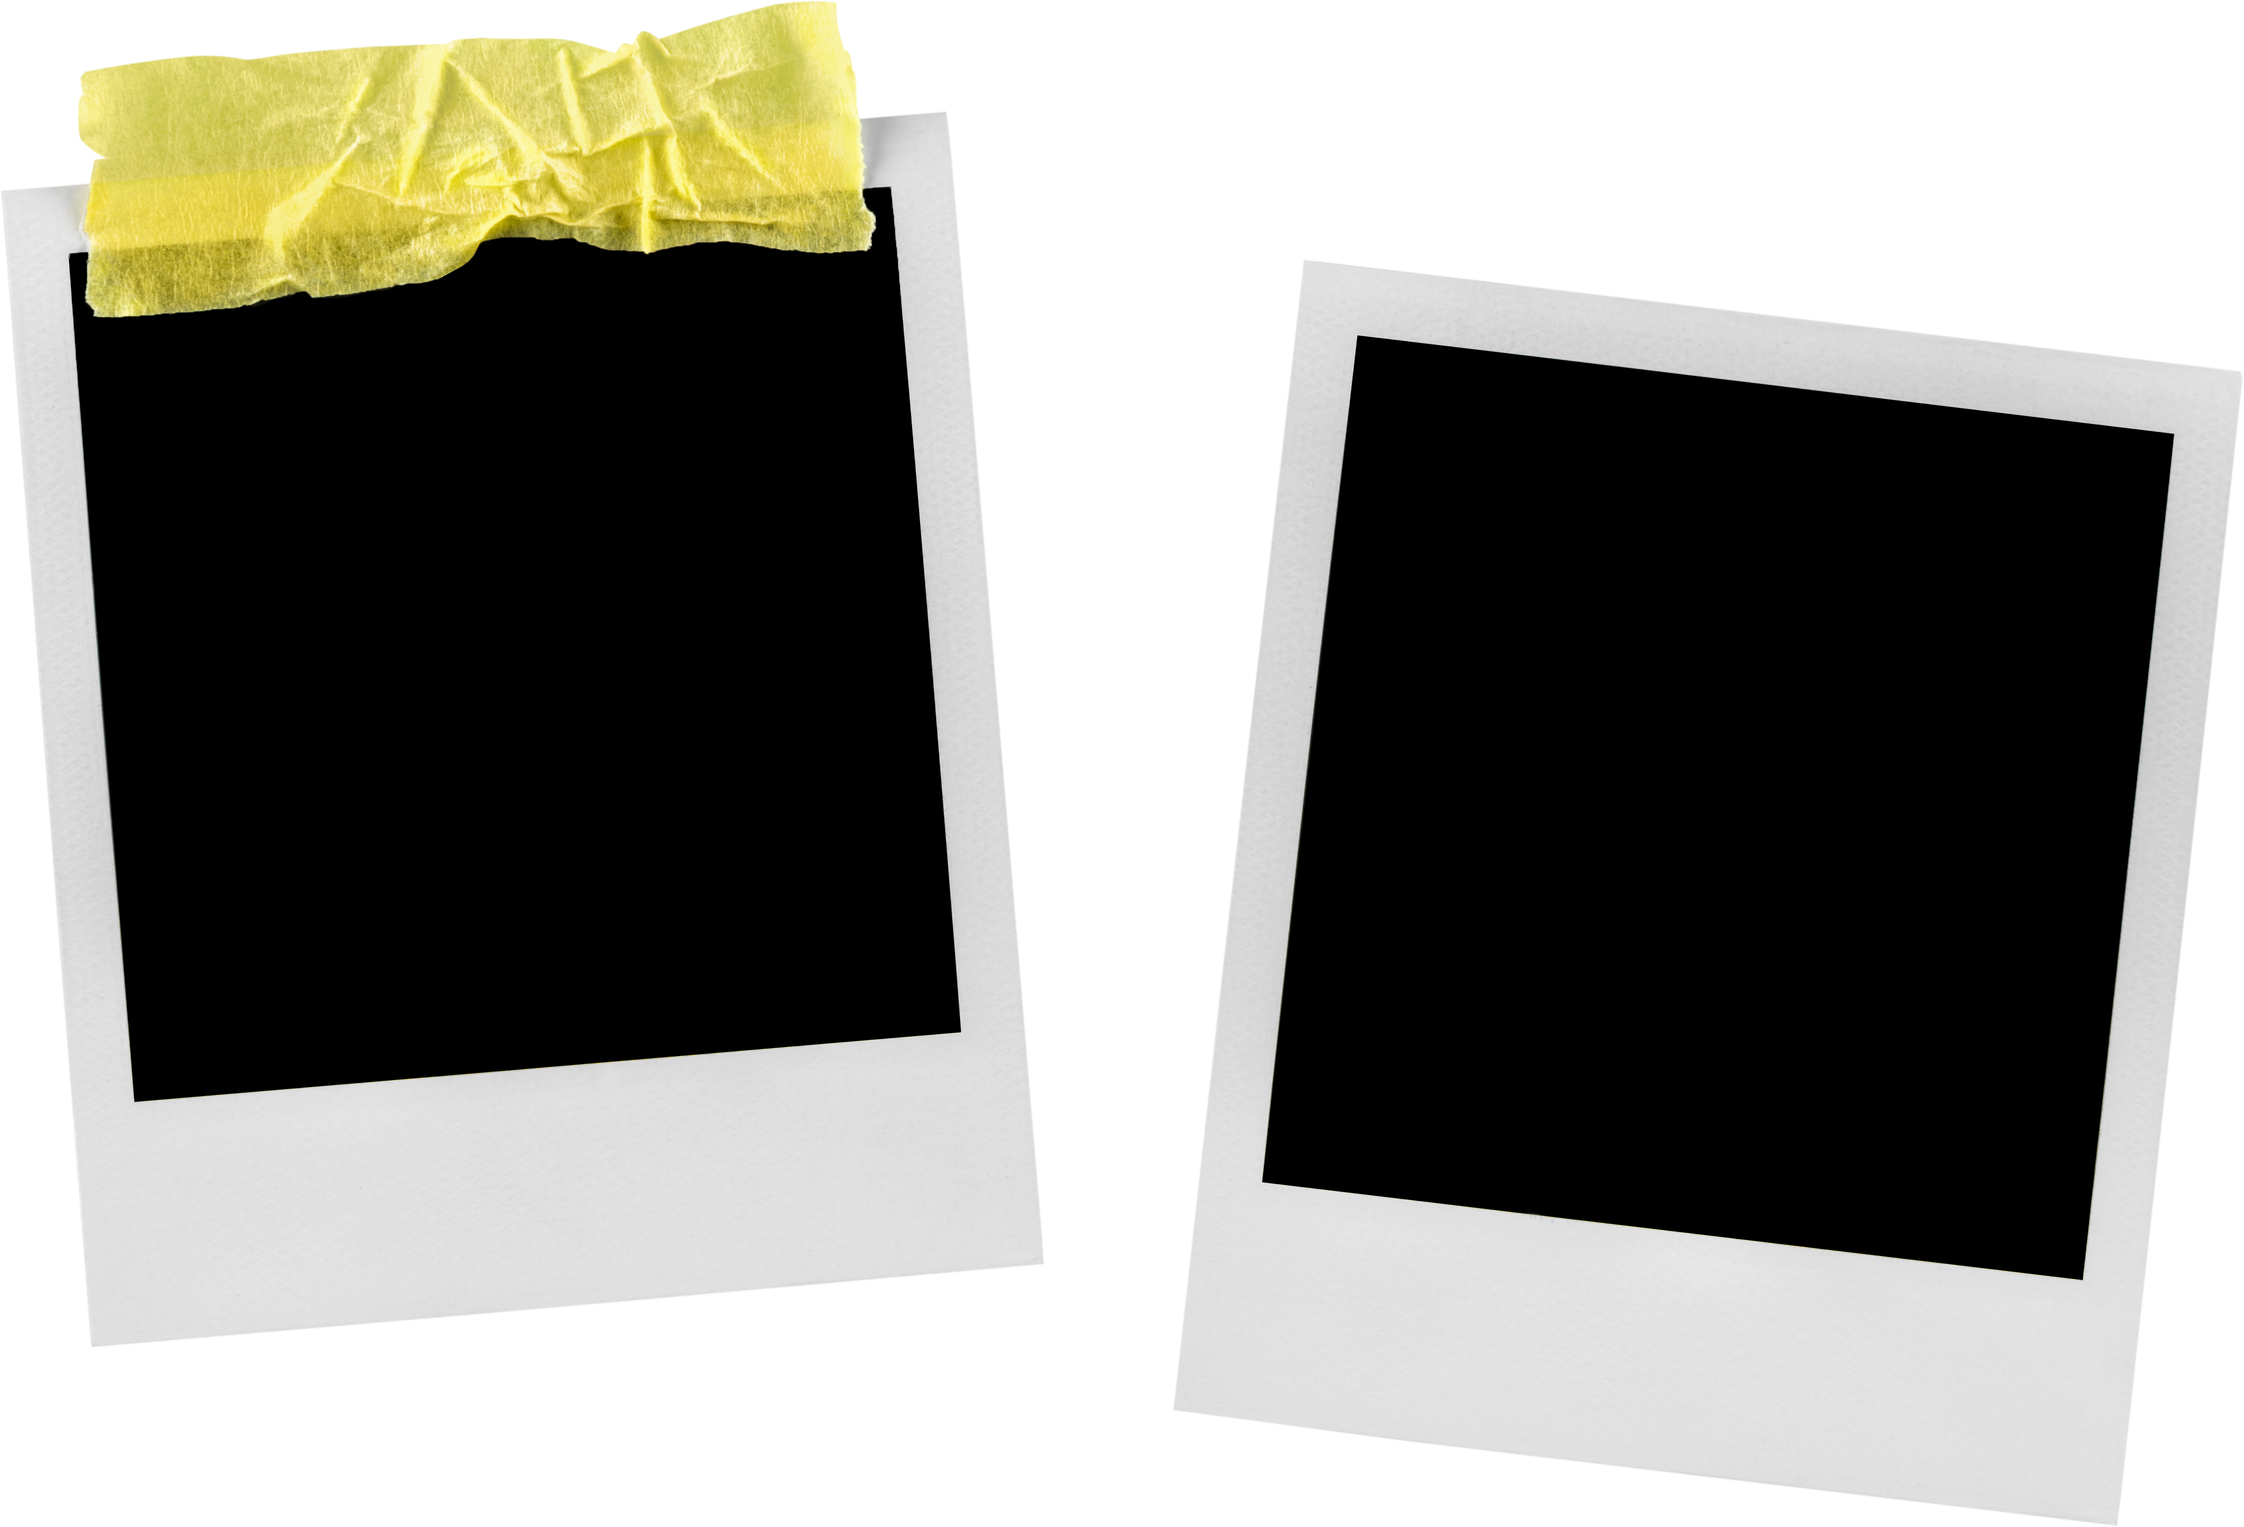 Two Blank Polaroid Frames with Adhesive Tape - Isolated